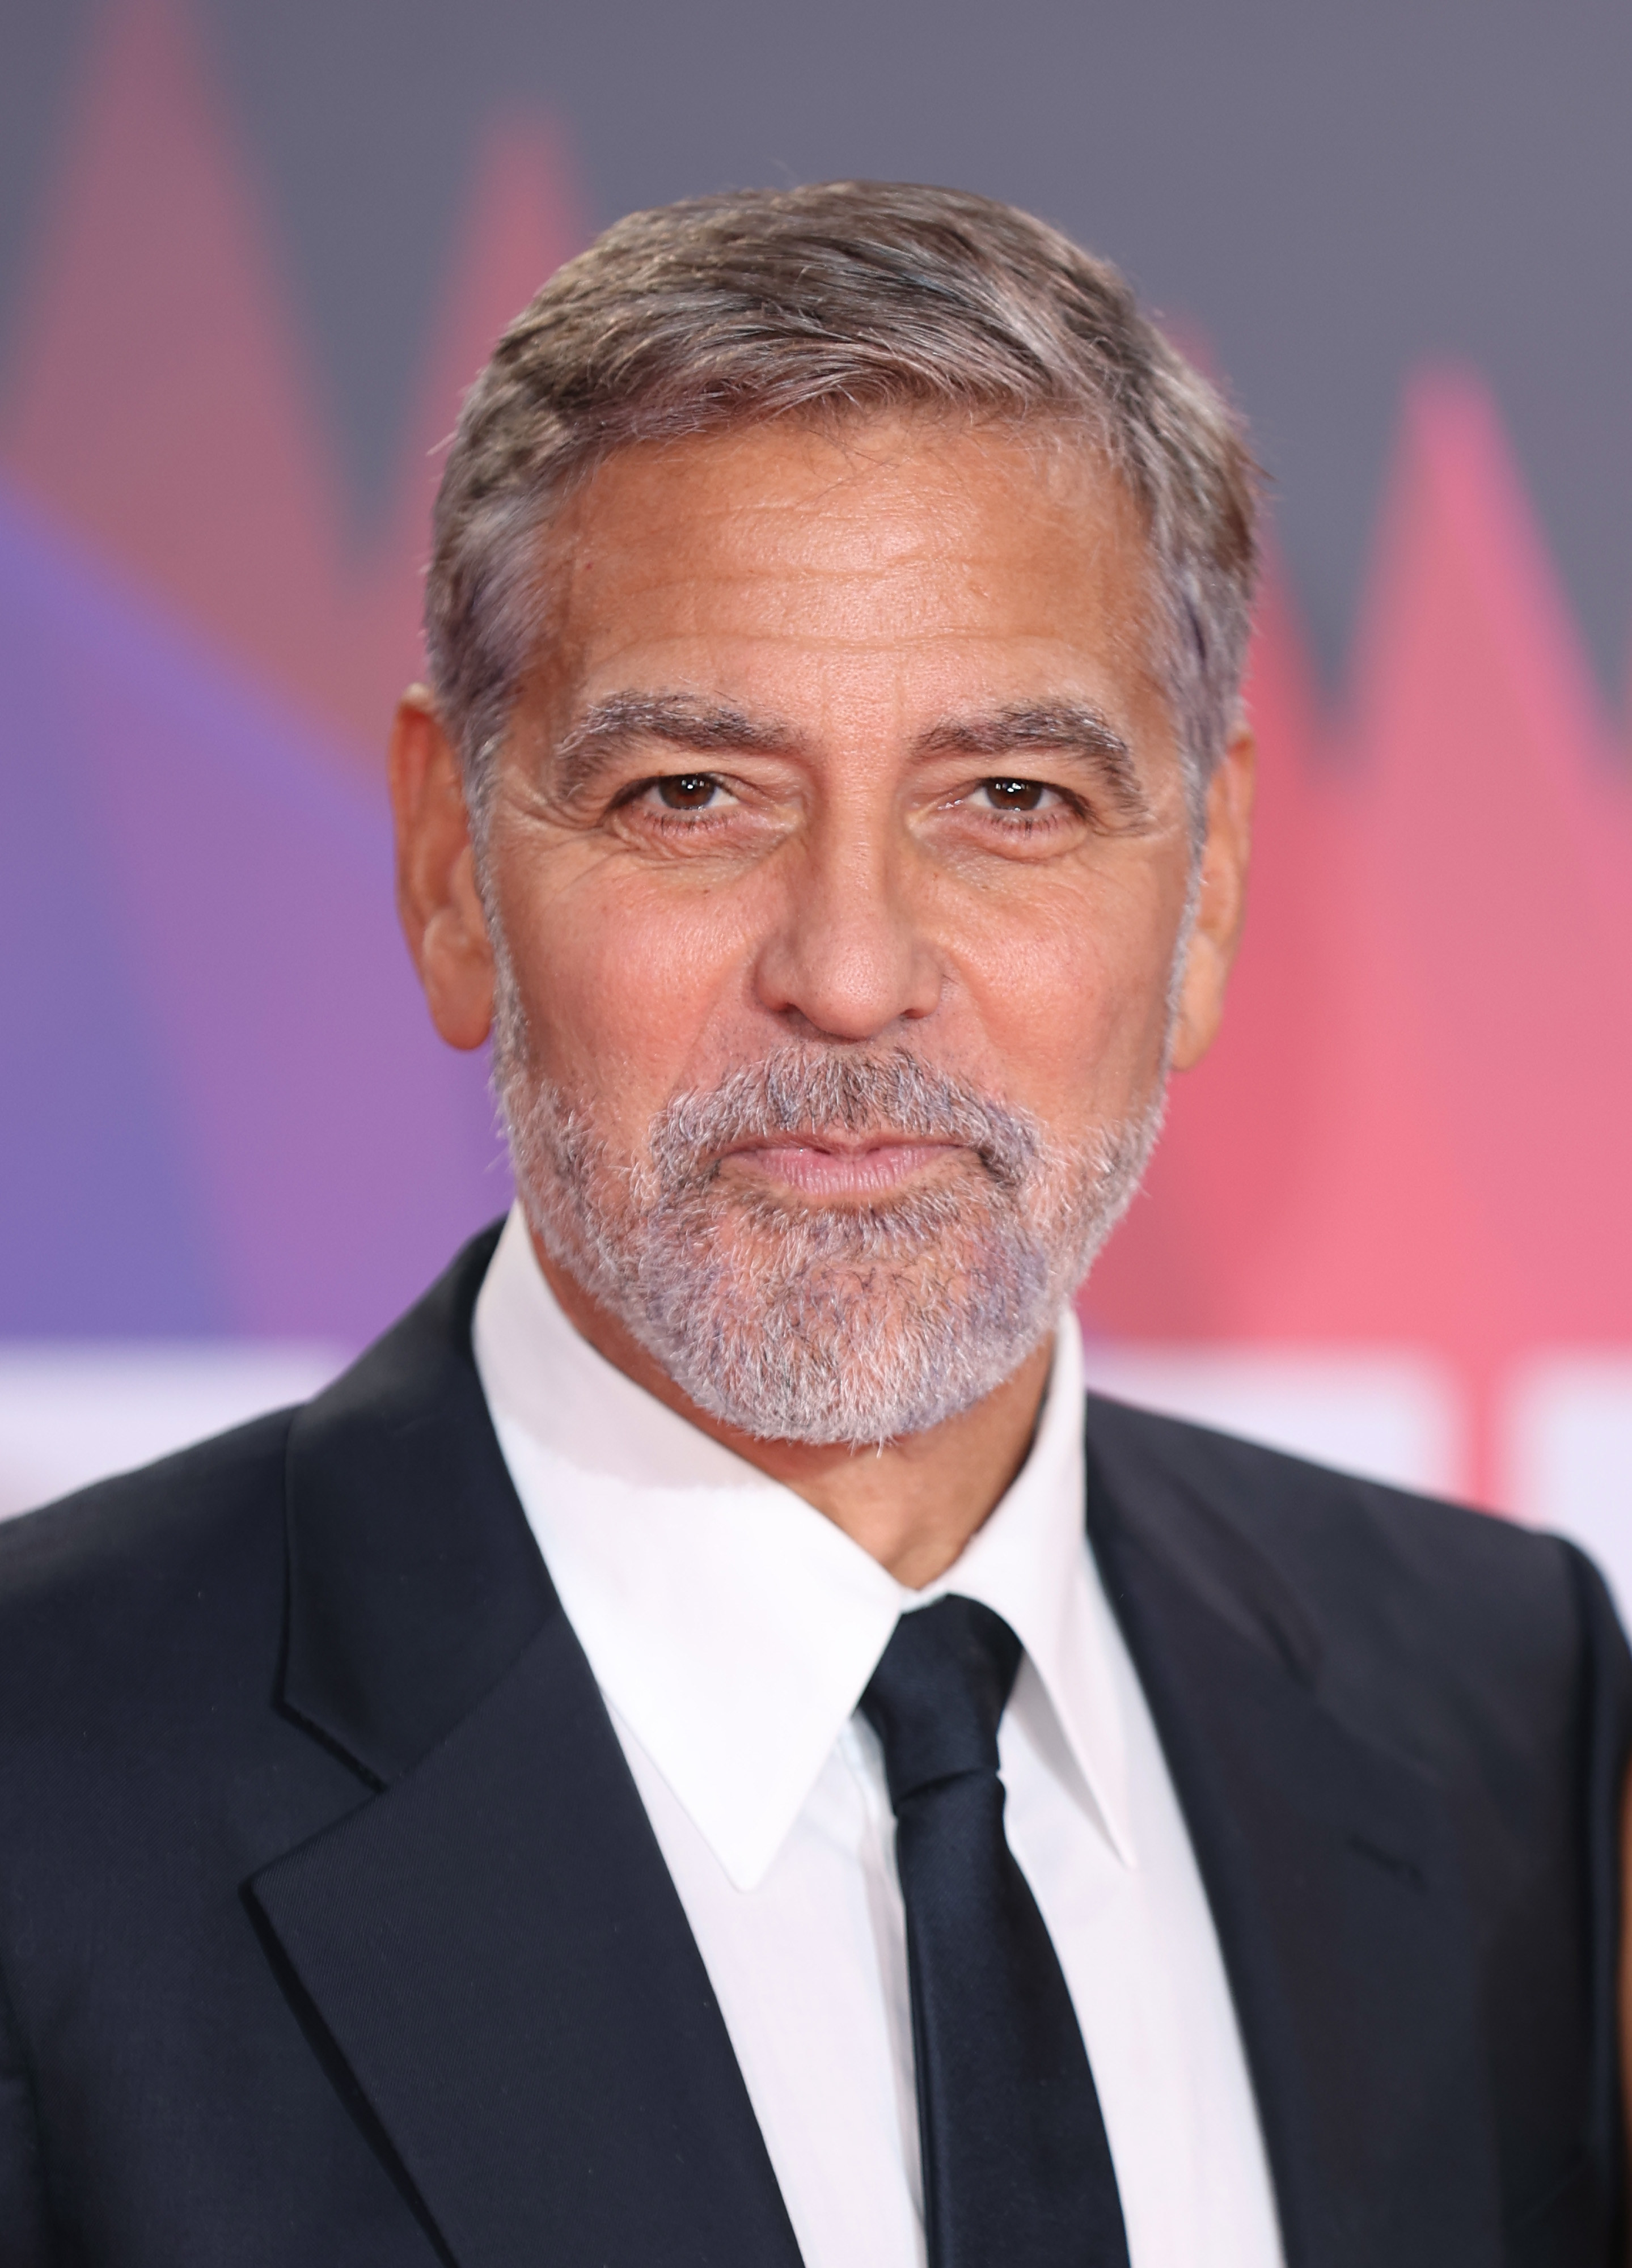 George Clooney poses at the premiere of &quot;The Tender Bar&quot; in October 2021